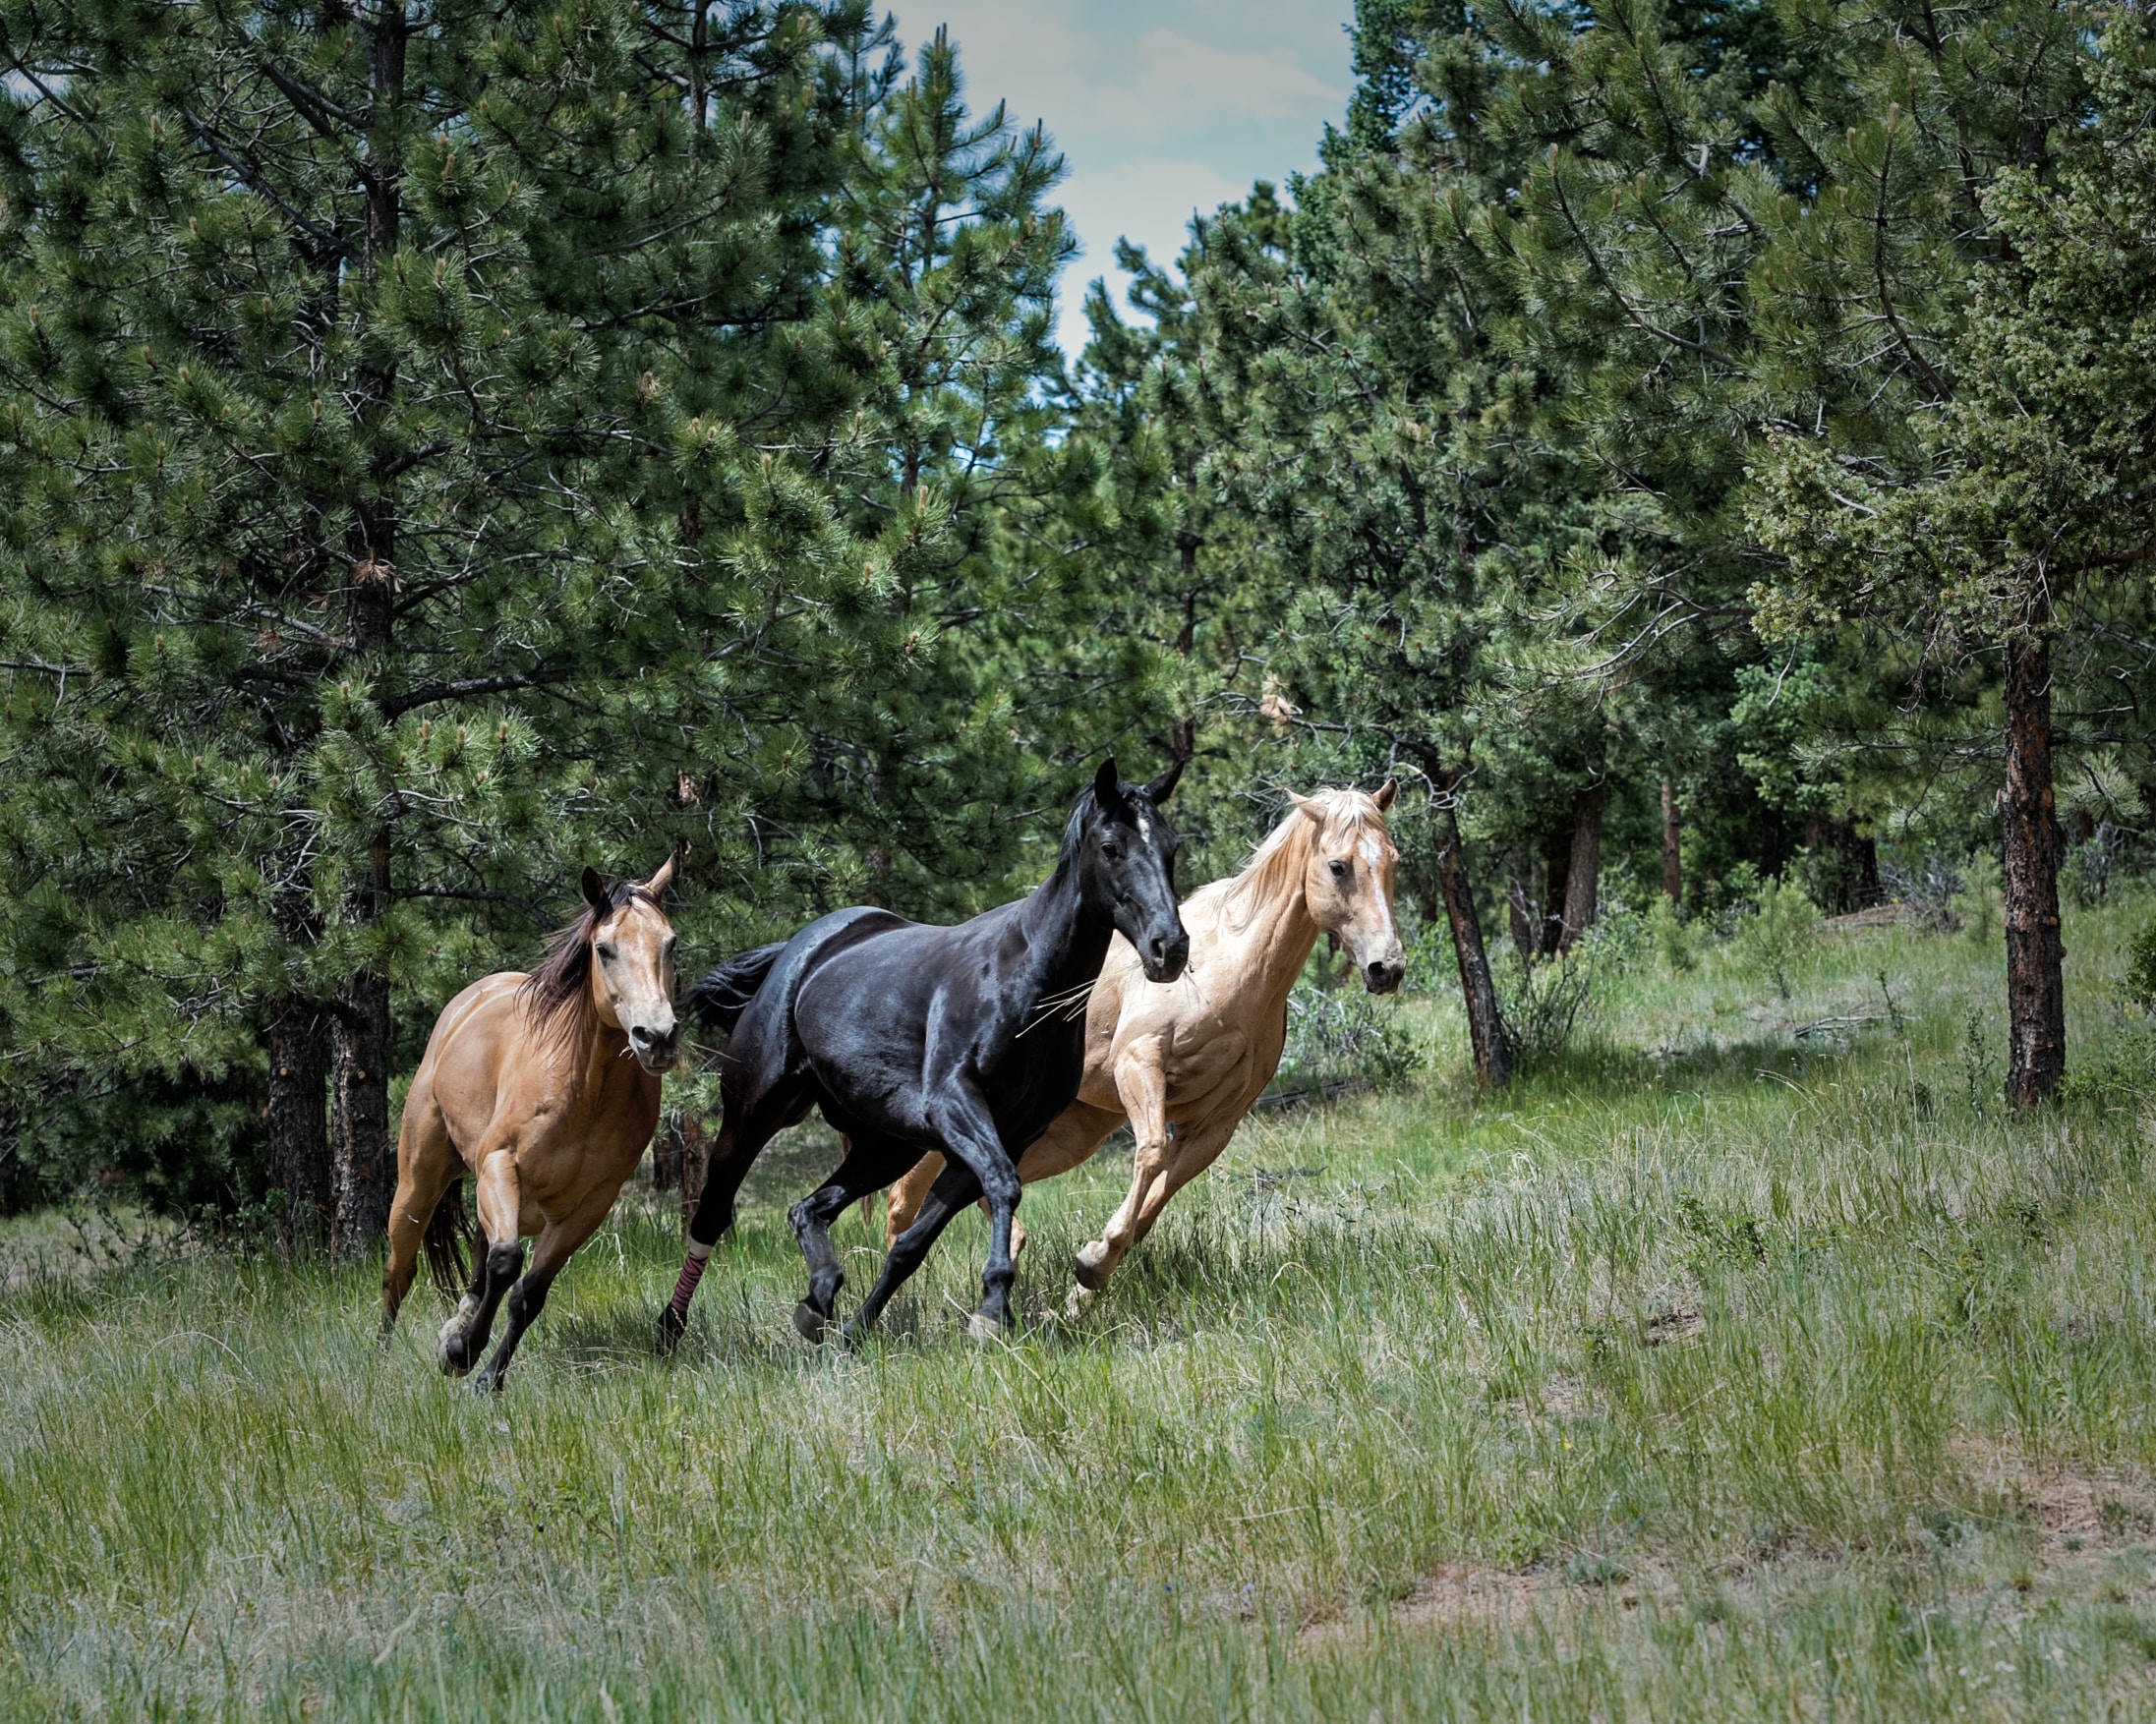 3 horses running through wooded field